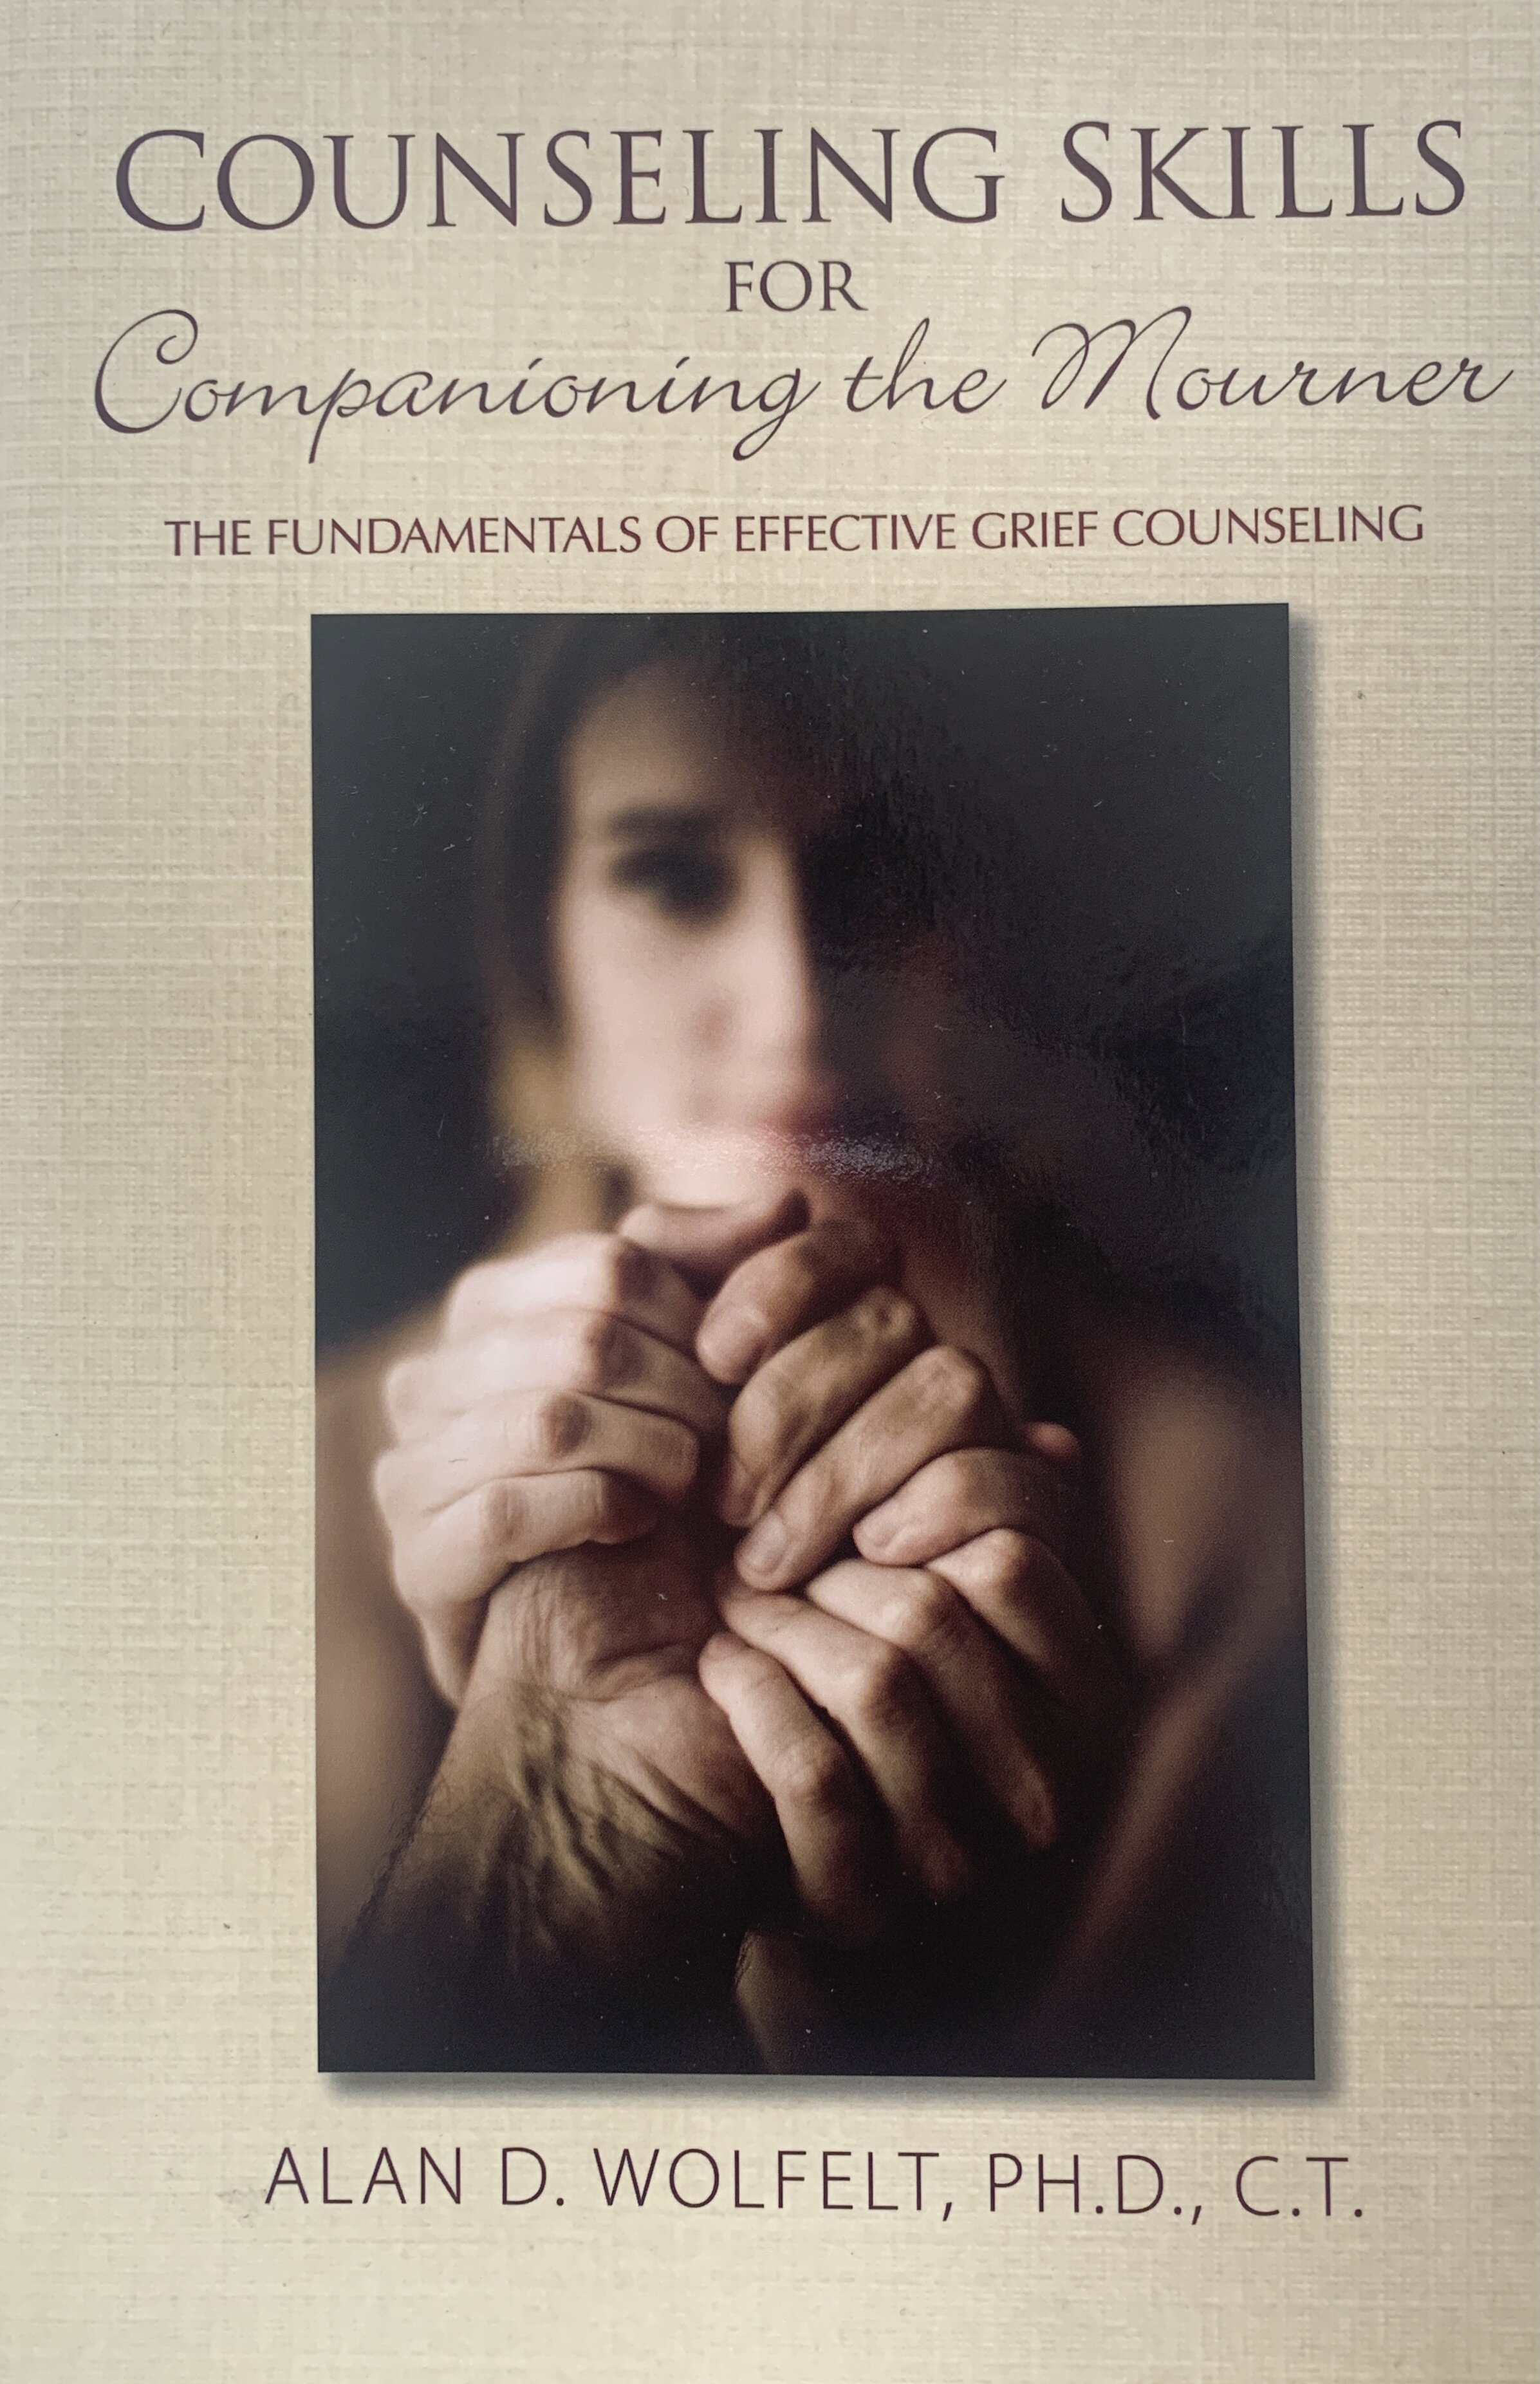 Counseling Skills for Companioning the Mourner: The Fundamentals of Effective Grief Counseling (Copy) (Copy) (Copy)